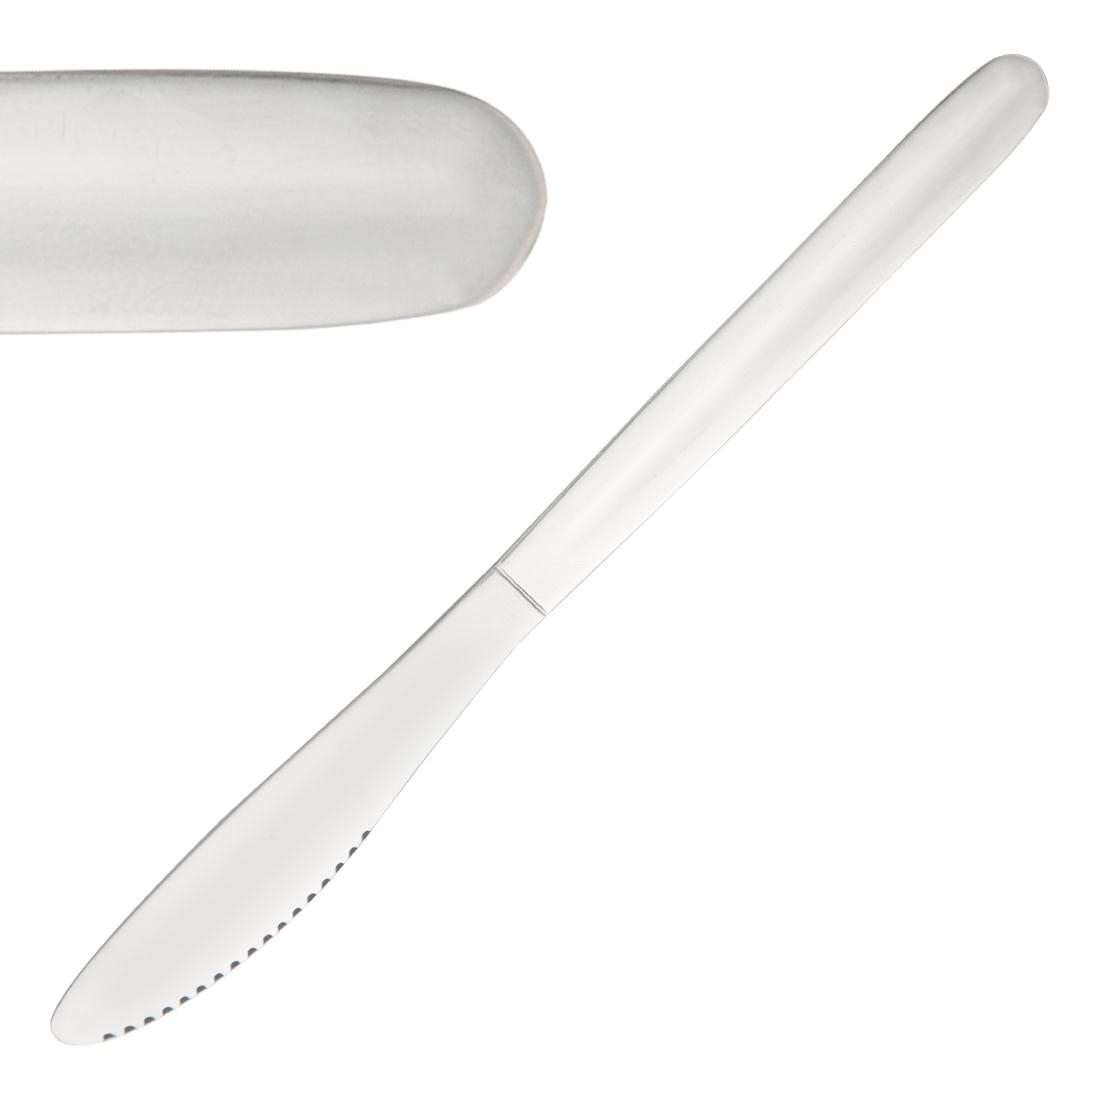 Olympia Kelso Table Knife